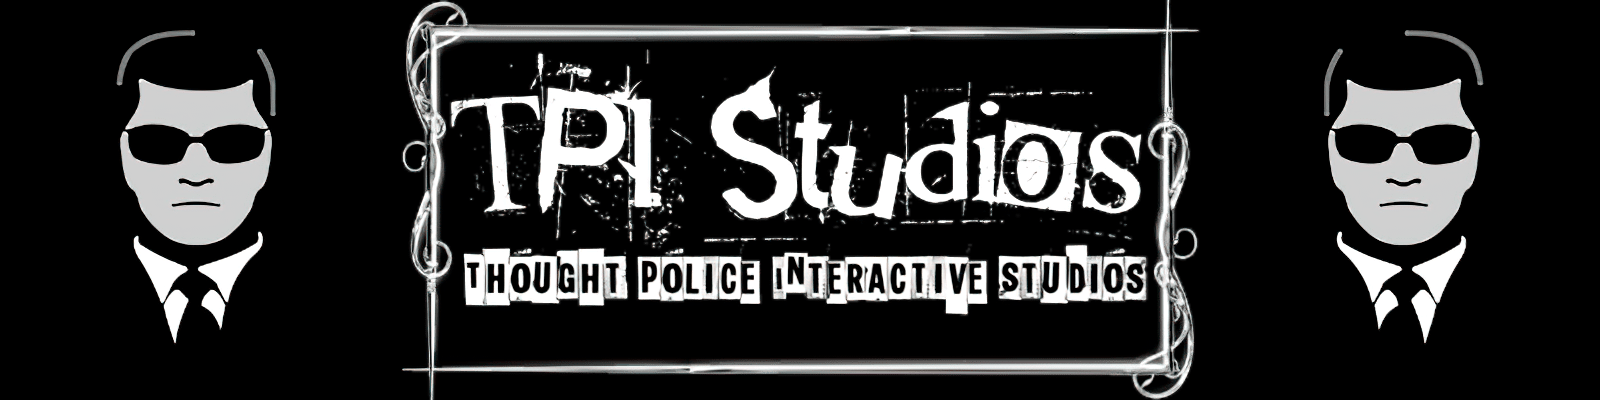 Thought Police Interactive